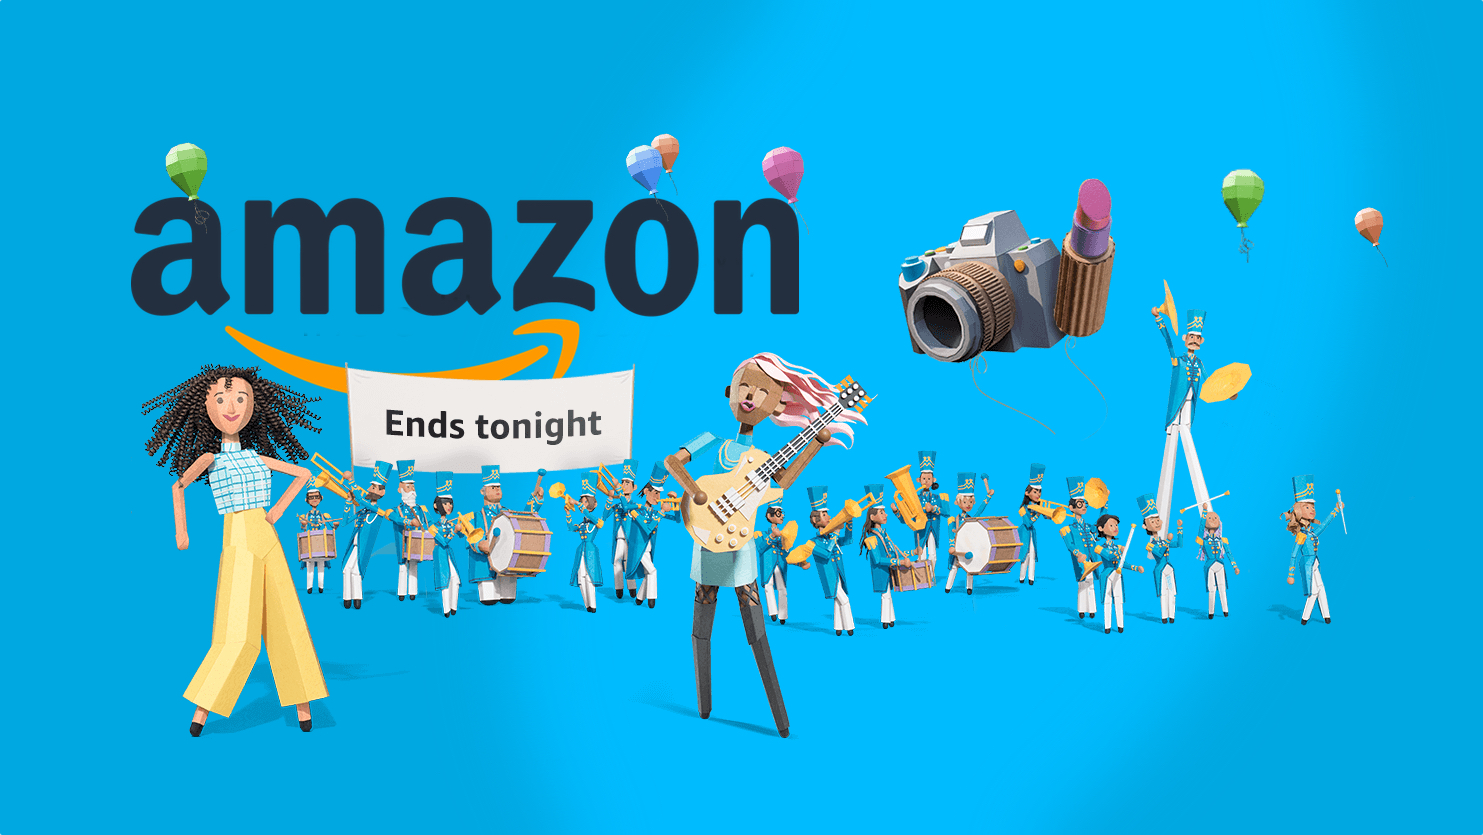 playstation amazon prime day